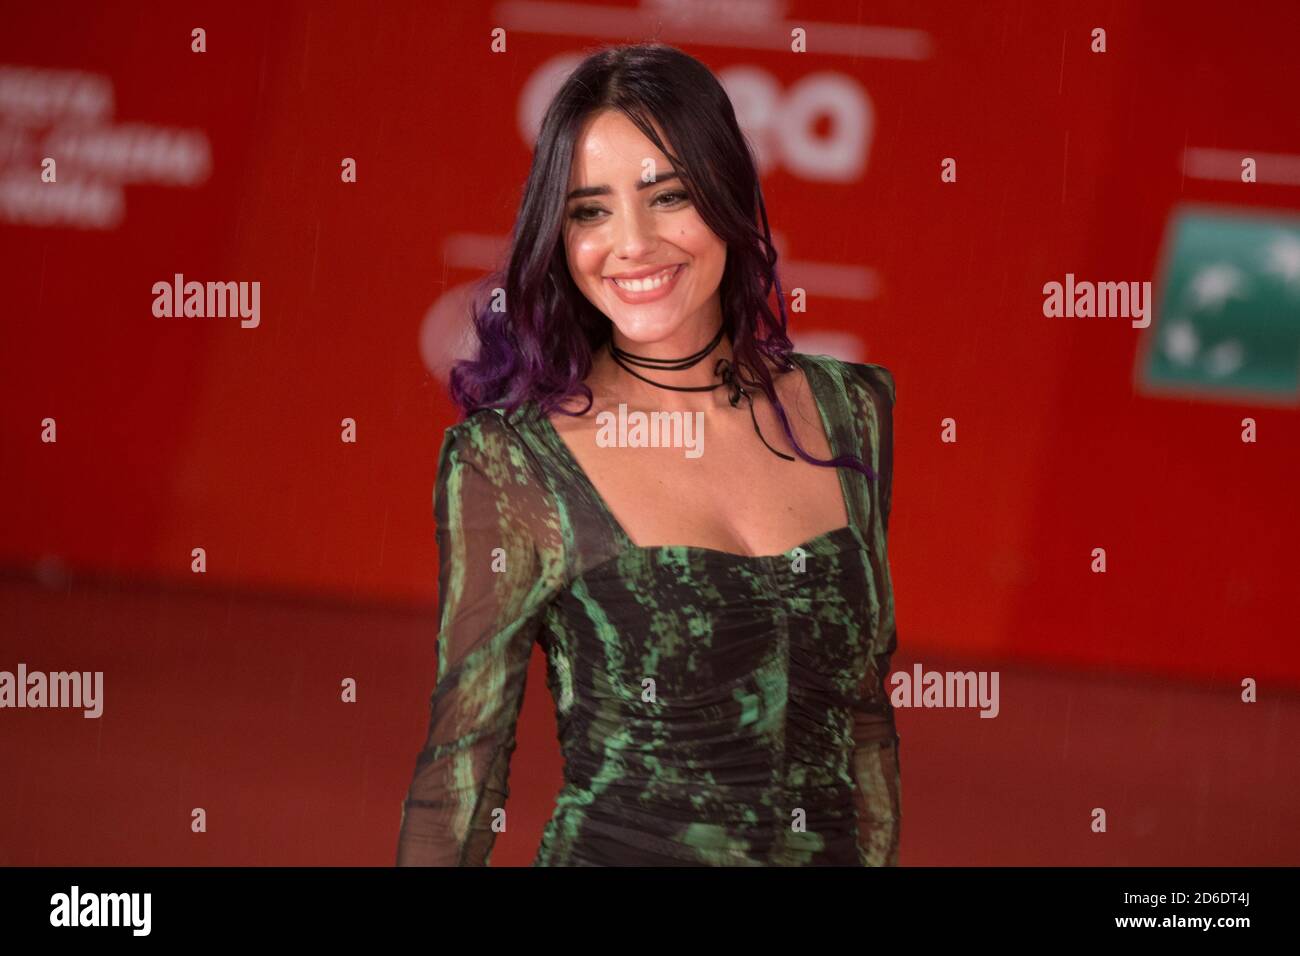 Rome, Italy. 15th Oct, 2020. Italian singer Giulia Penna on Red Carpet of  the first evening of the Rome Film Festival 2020, on October 15, 2020 in  Rome, Italy. (Photo by Matteo